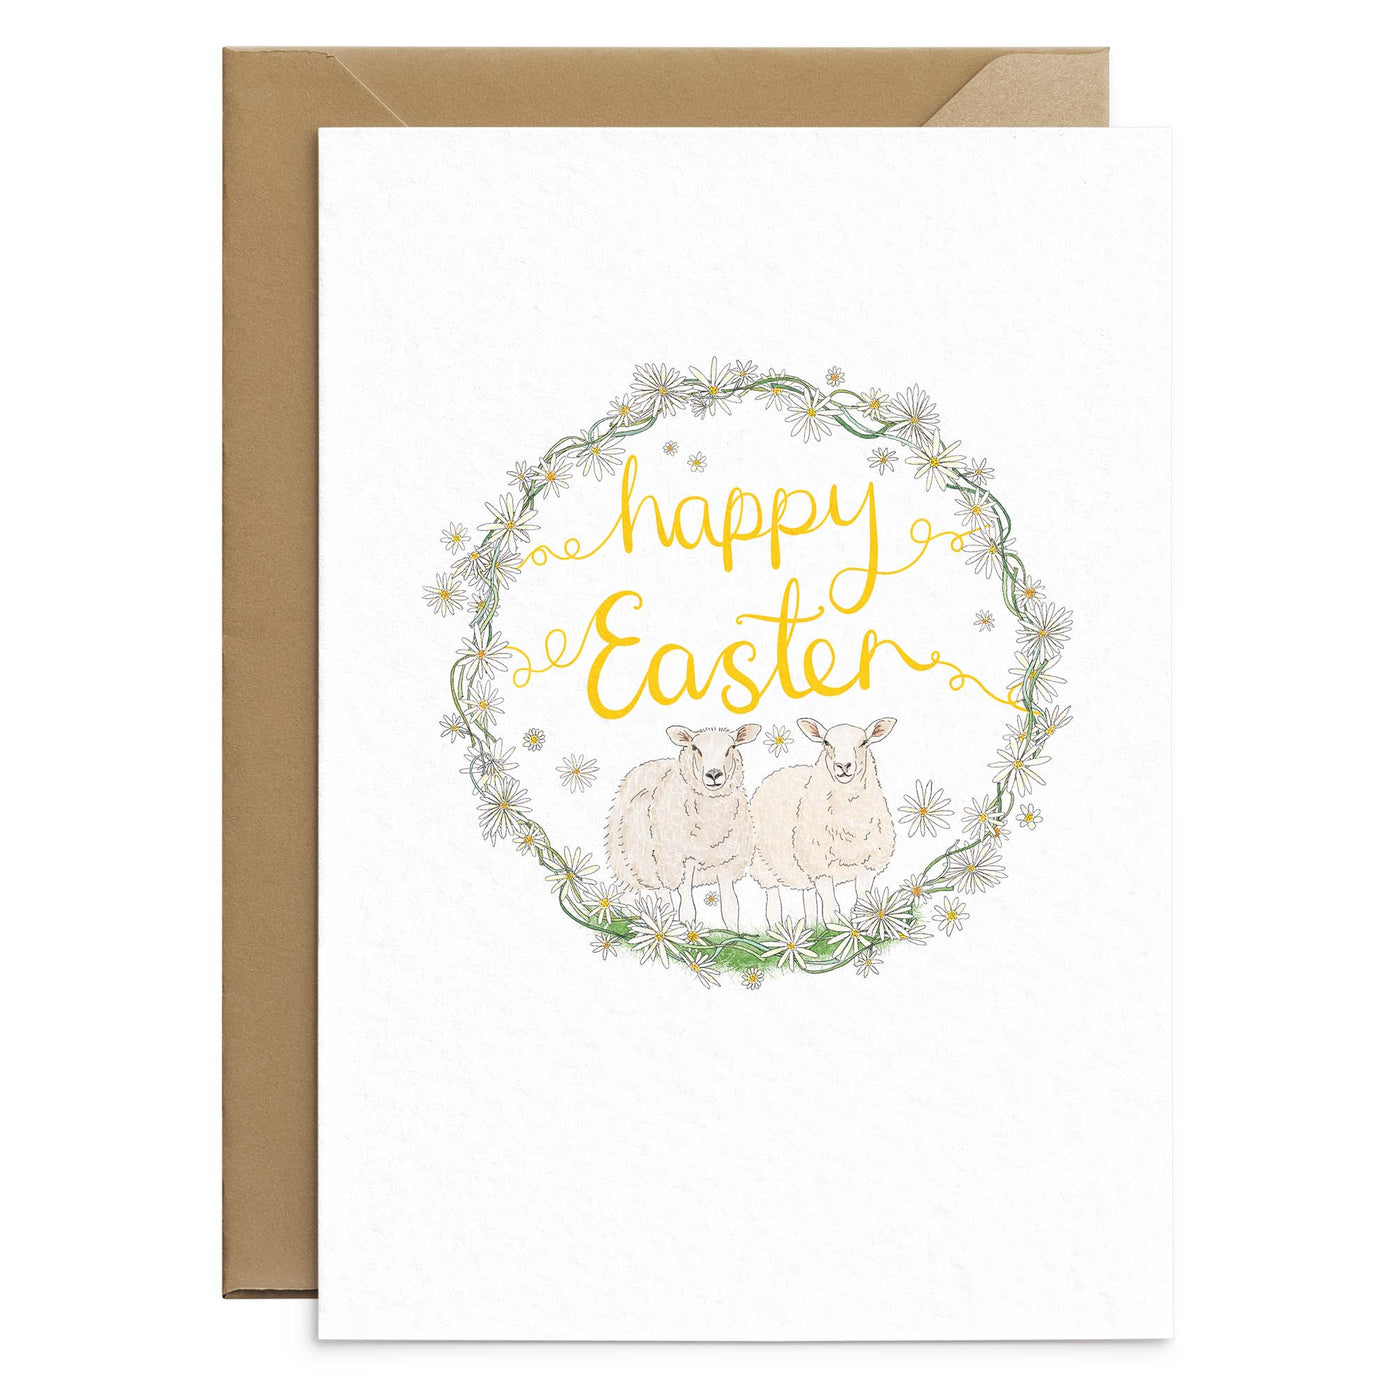 A cute easter greetings card featuring two sheep drawn inside a wreath of daisies and completed by hand scripted yellow text that reads 'happy easter'. On a brown recycled envelopes. Greetings cards by Poppins and co.